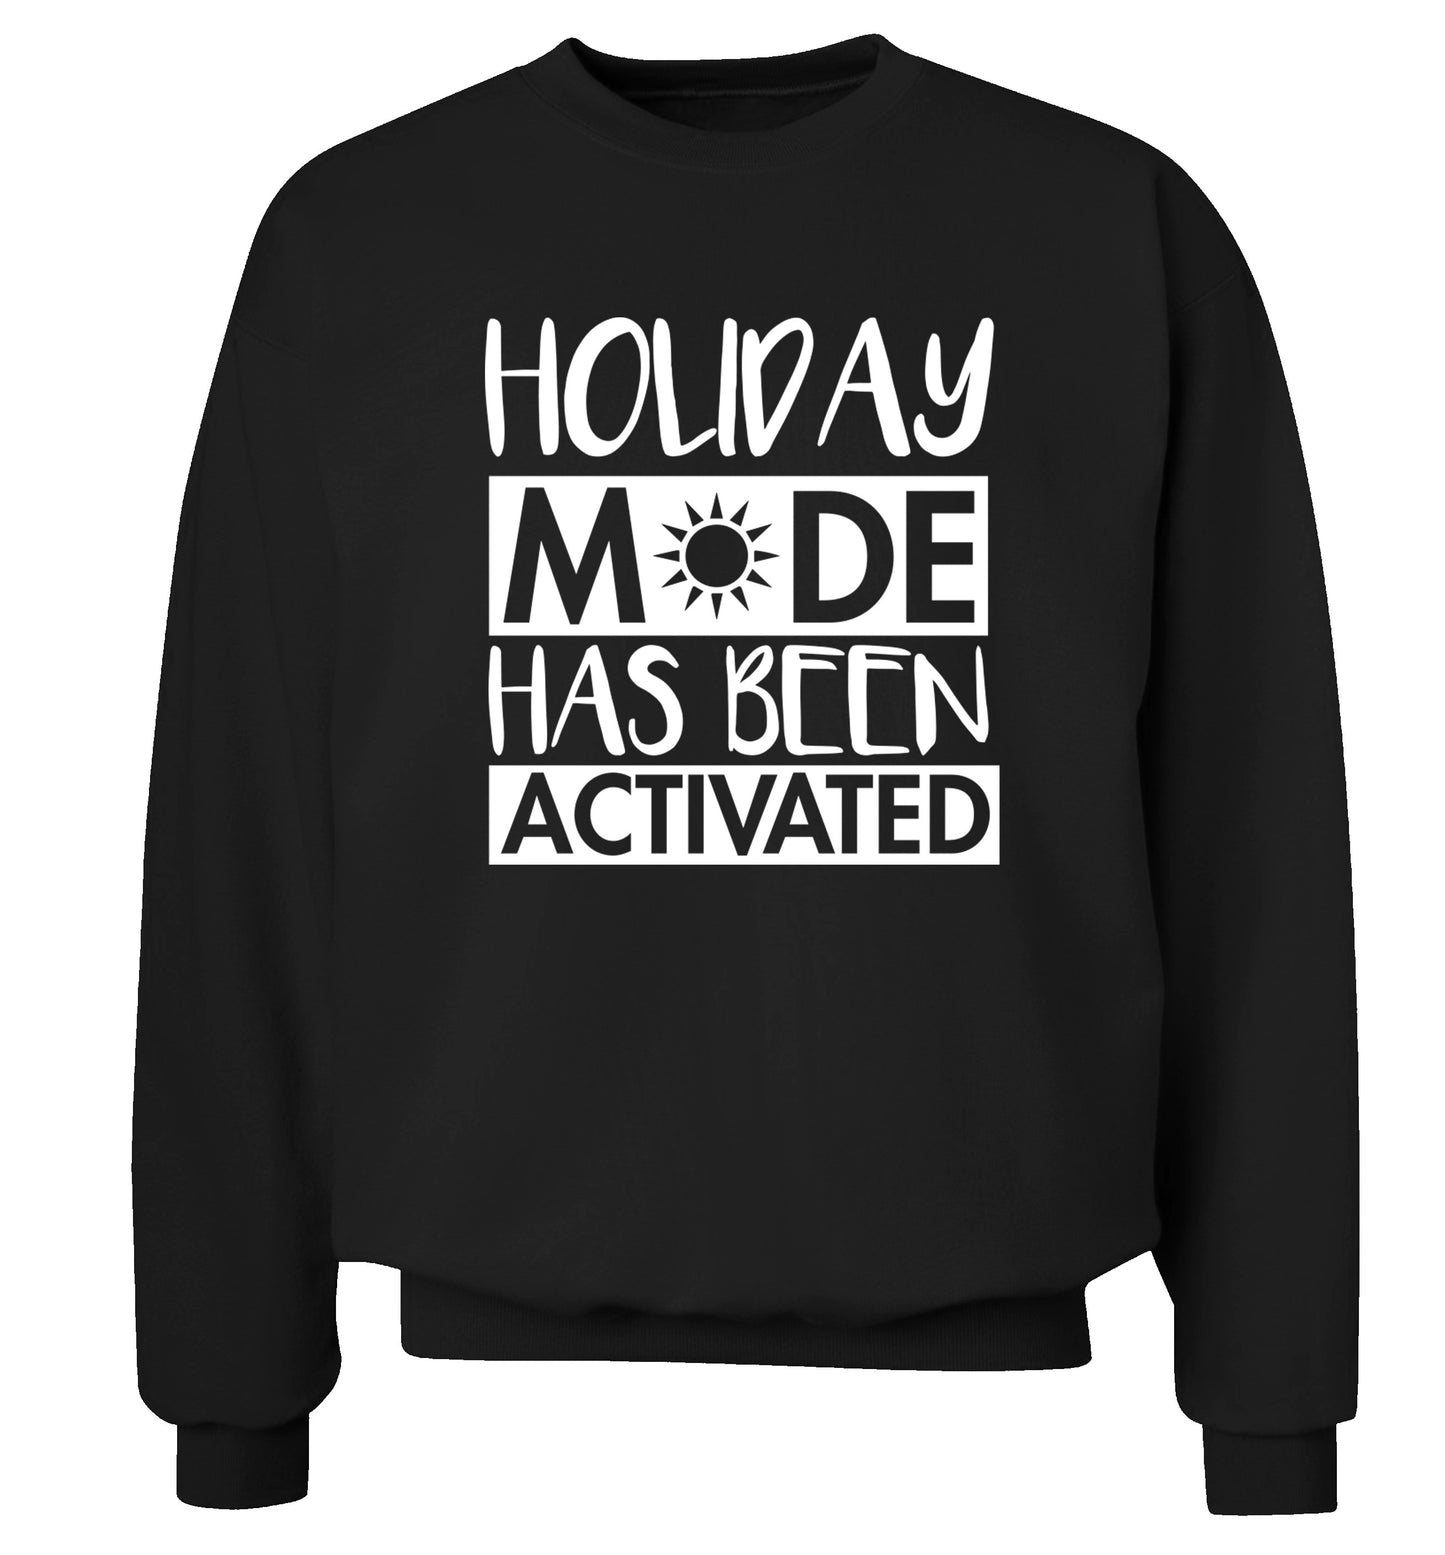 Holiday mode has been activated Adult's unisex black Sweater 2XL